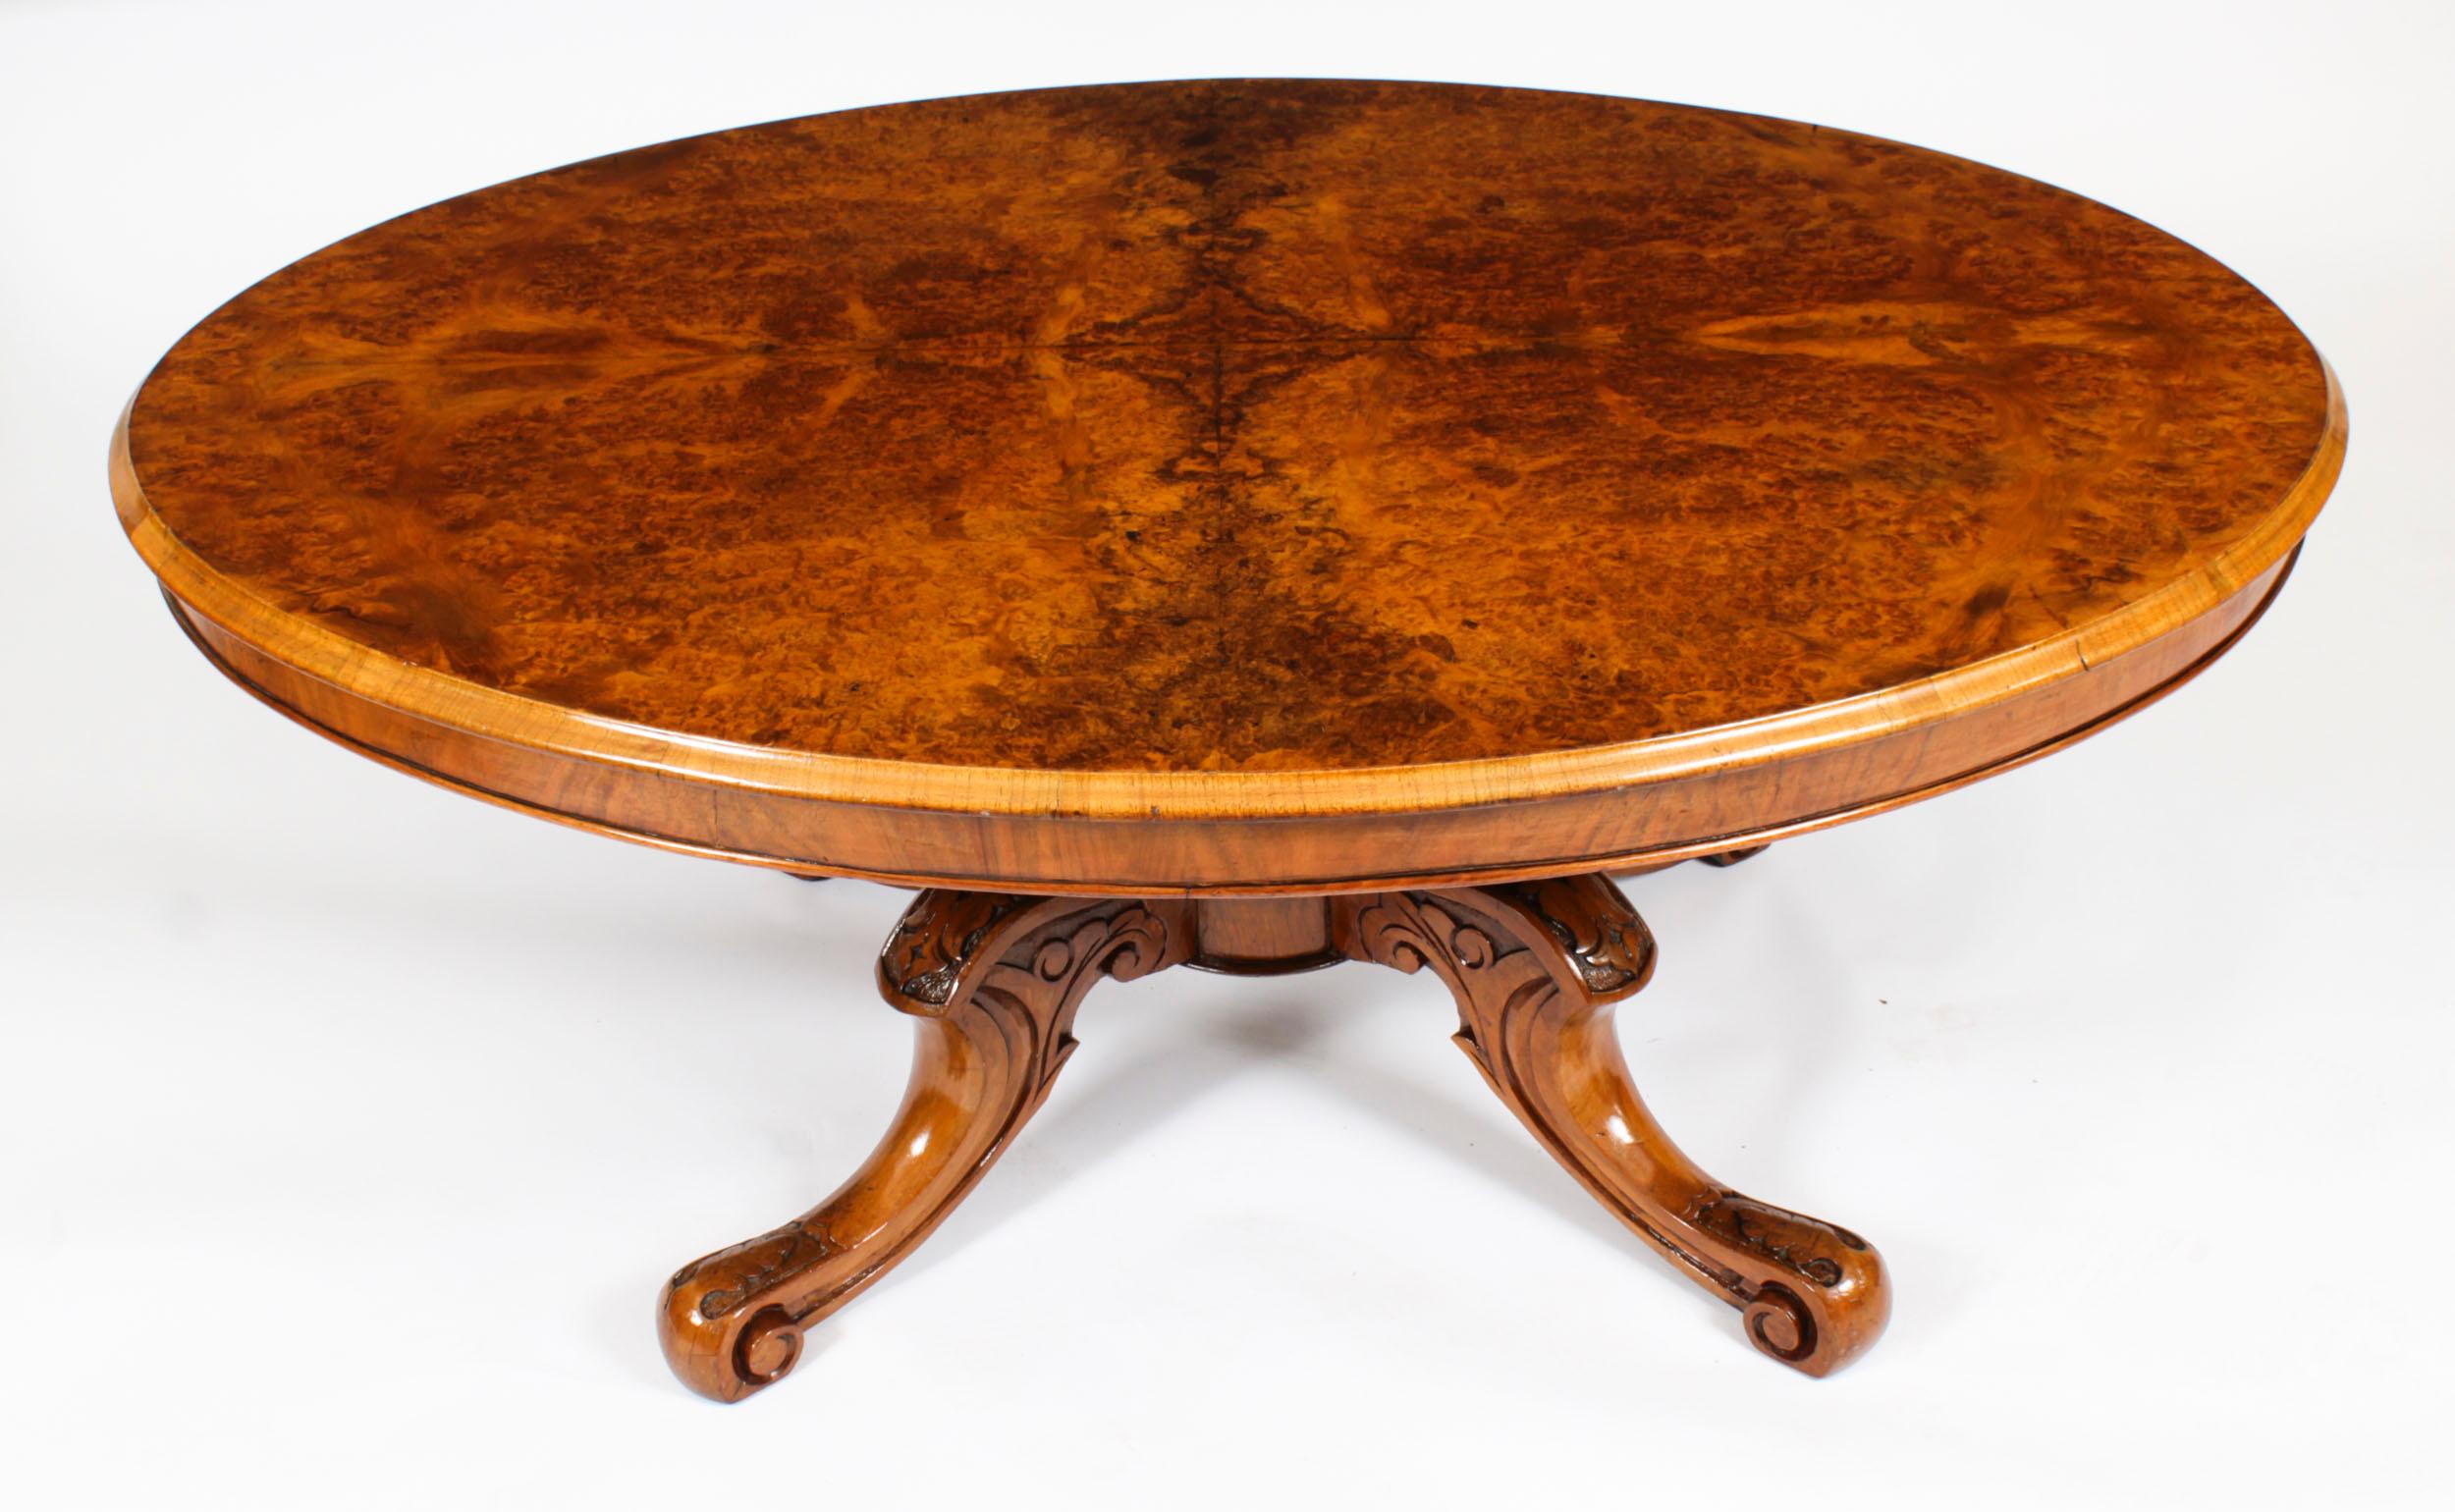 This is a lovely antique Victorian burr walnut coffee table, circa 1860 in date.

The oval table top features a beautifully figured ‘mirrored’ burr walnut veneer.

The base has been hand carved from solid walnut and stands on four cabriole legs with